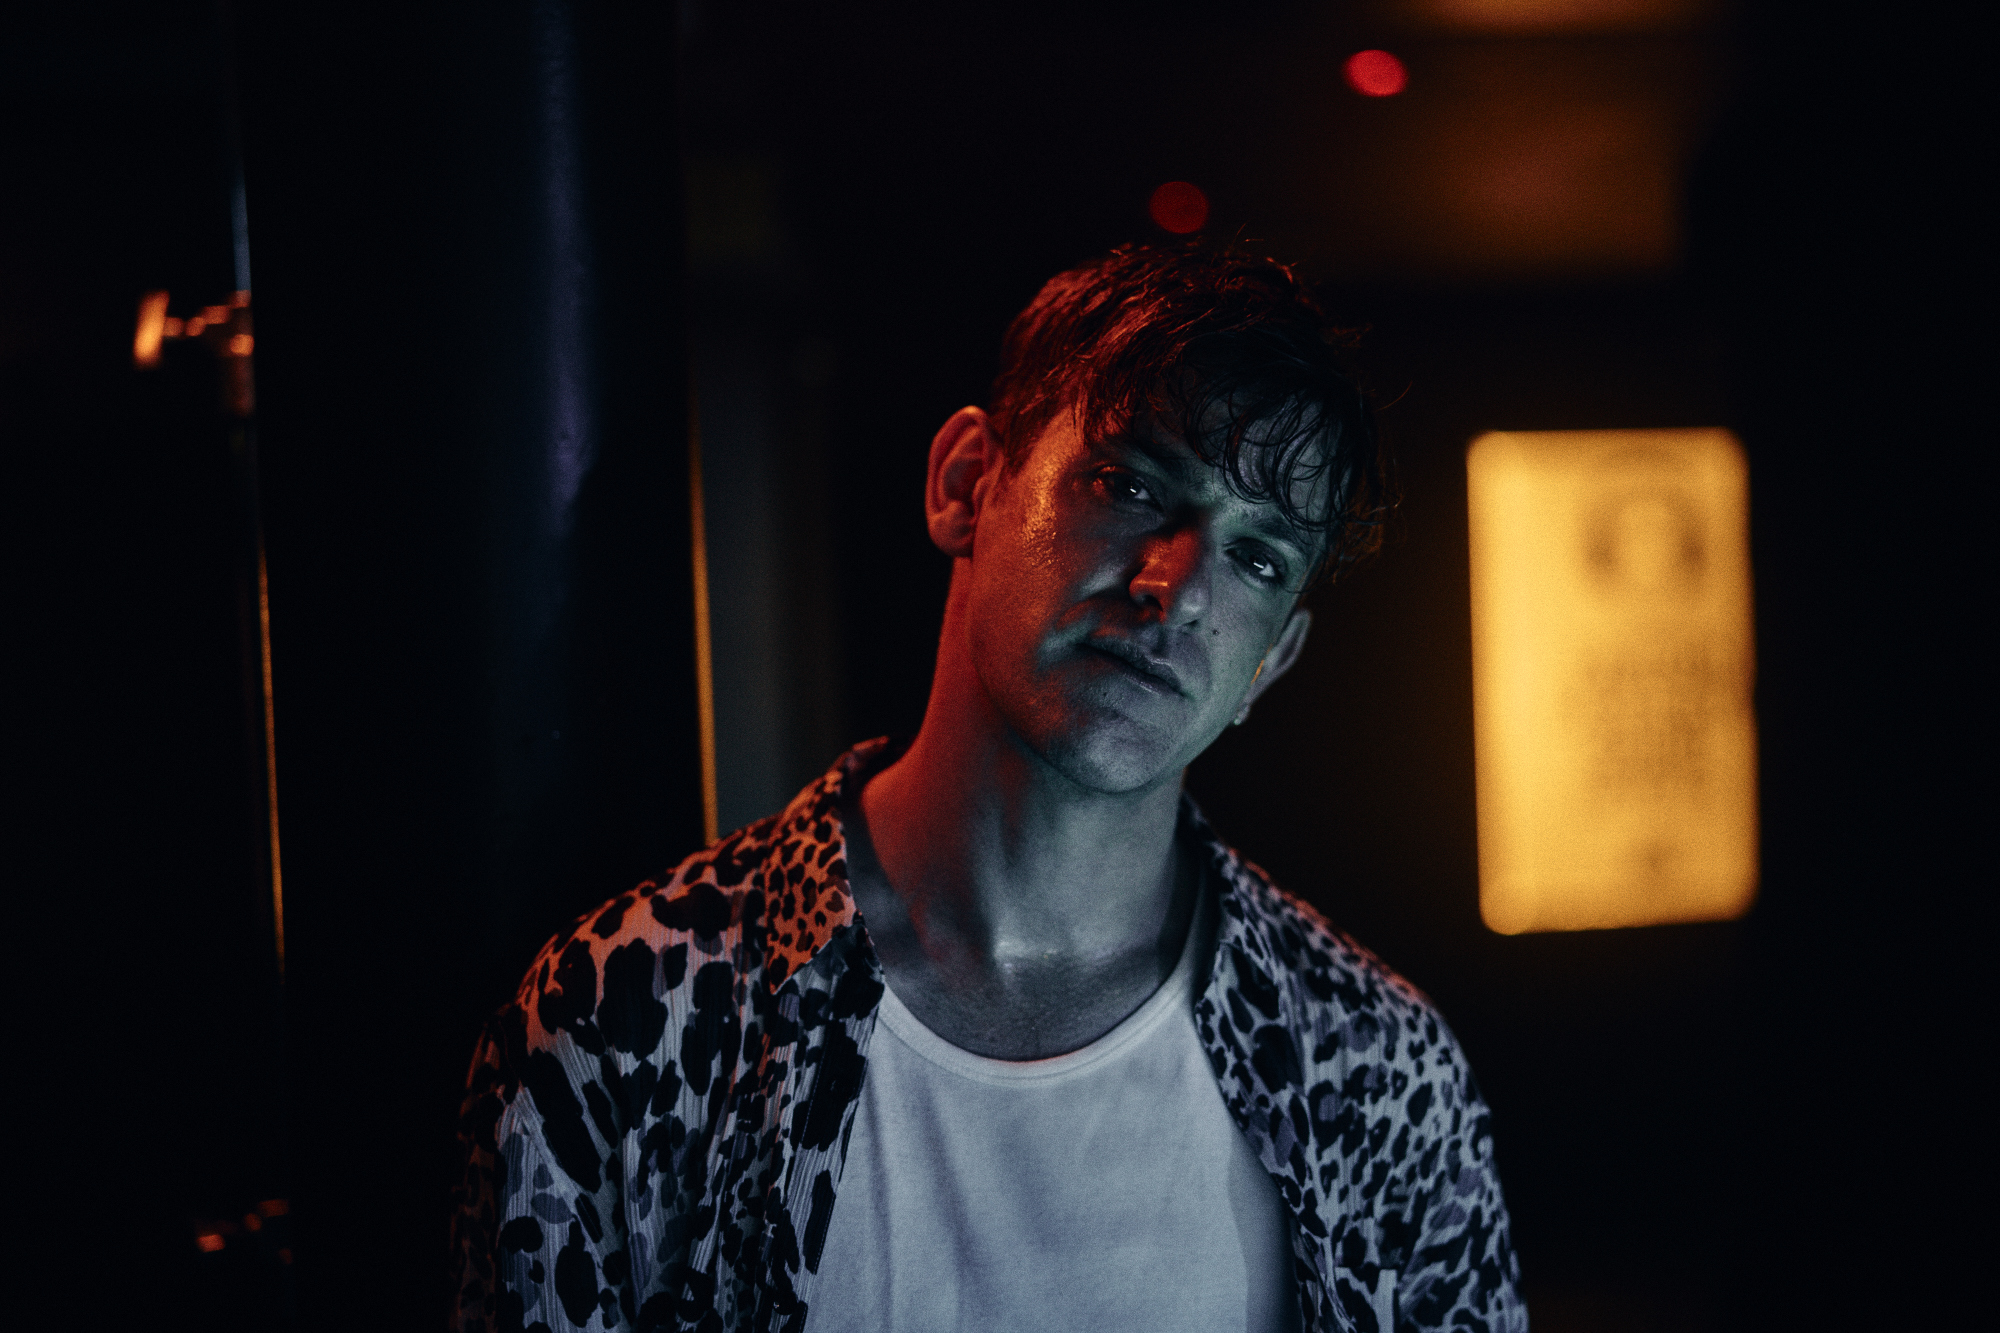 JOSEF SALVAT RELEASES NEW SINGLE ‘PAPER MOONS’ WITH VIDEO